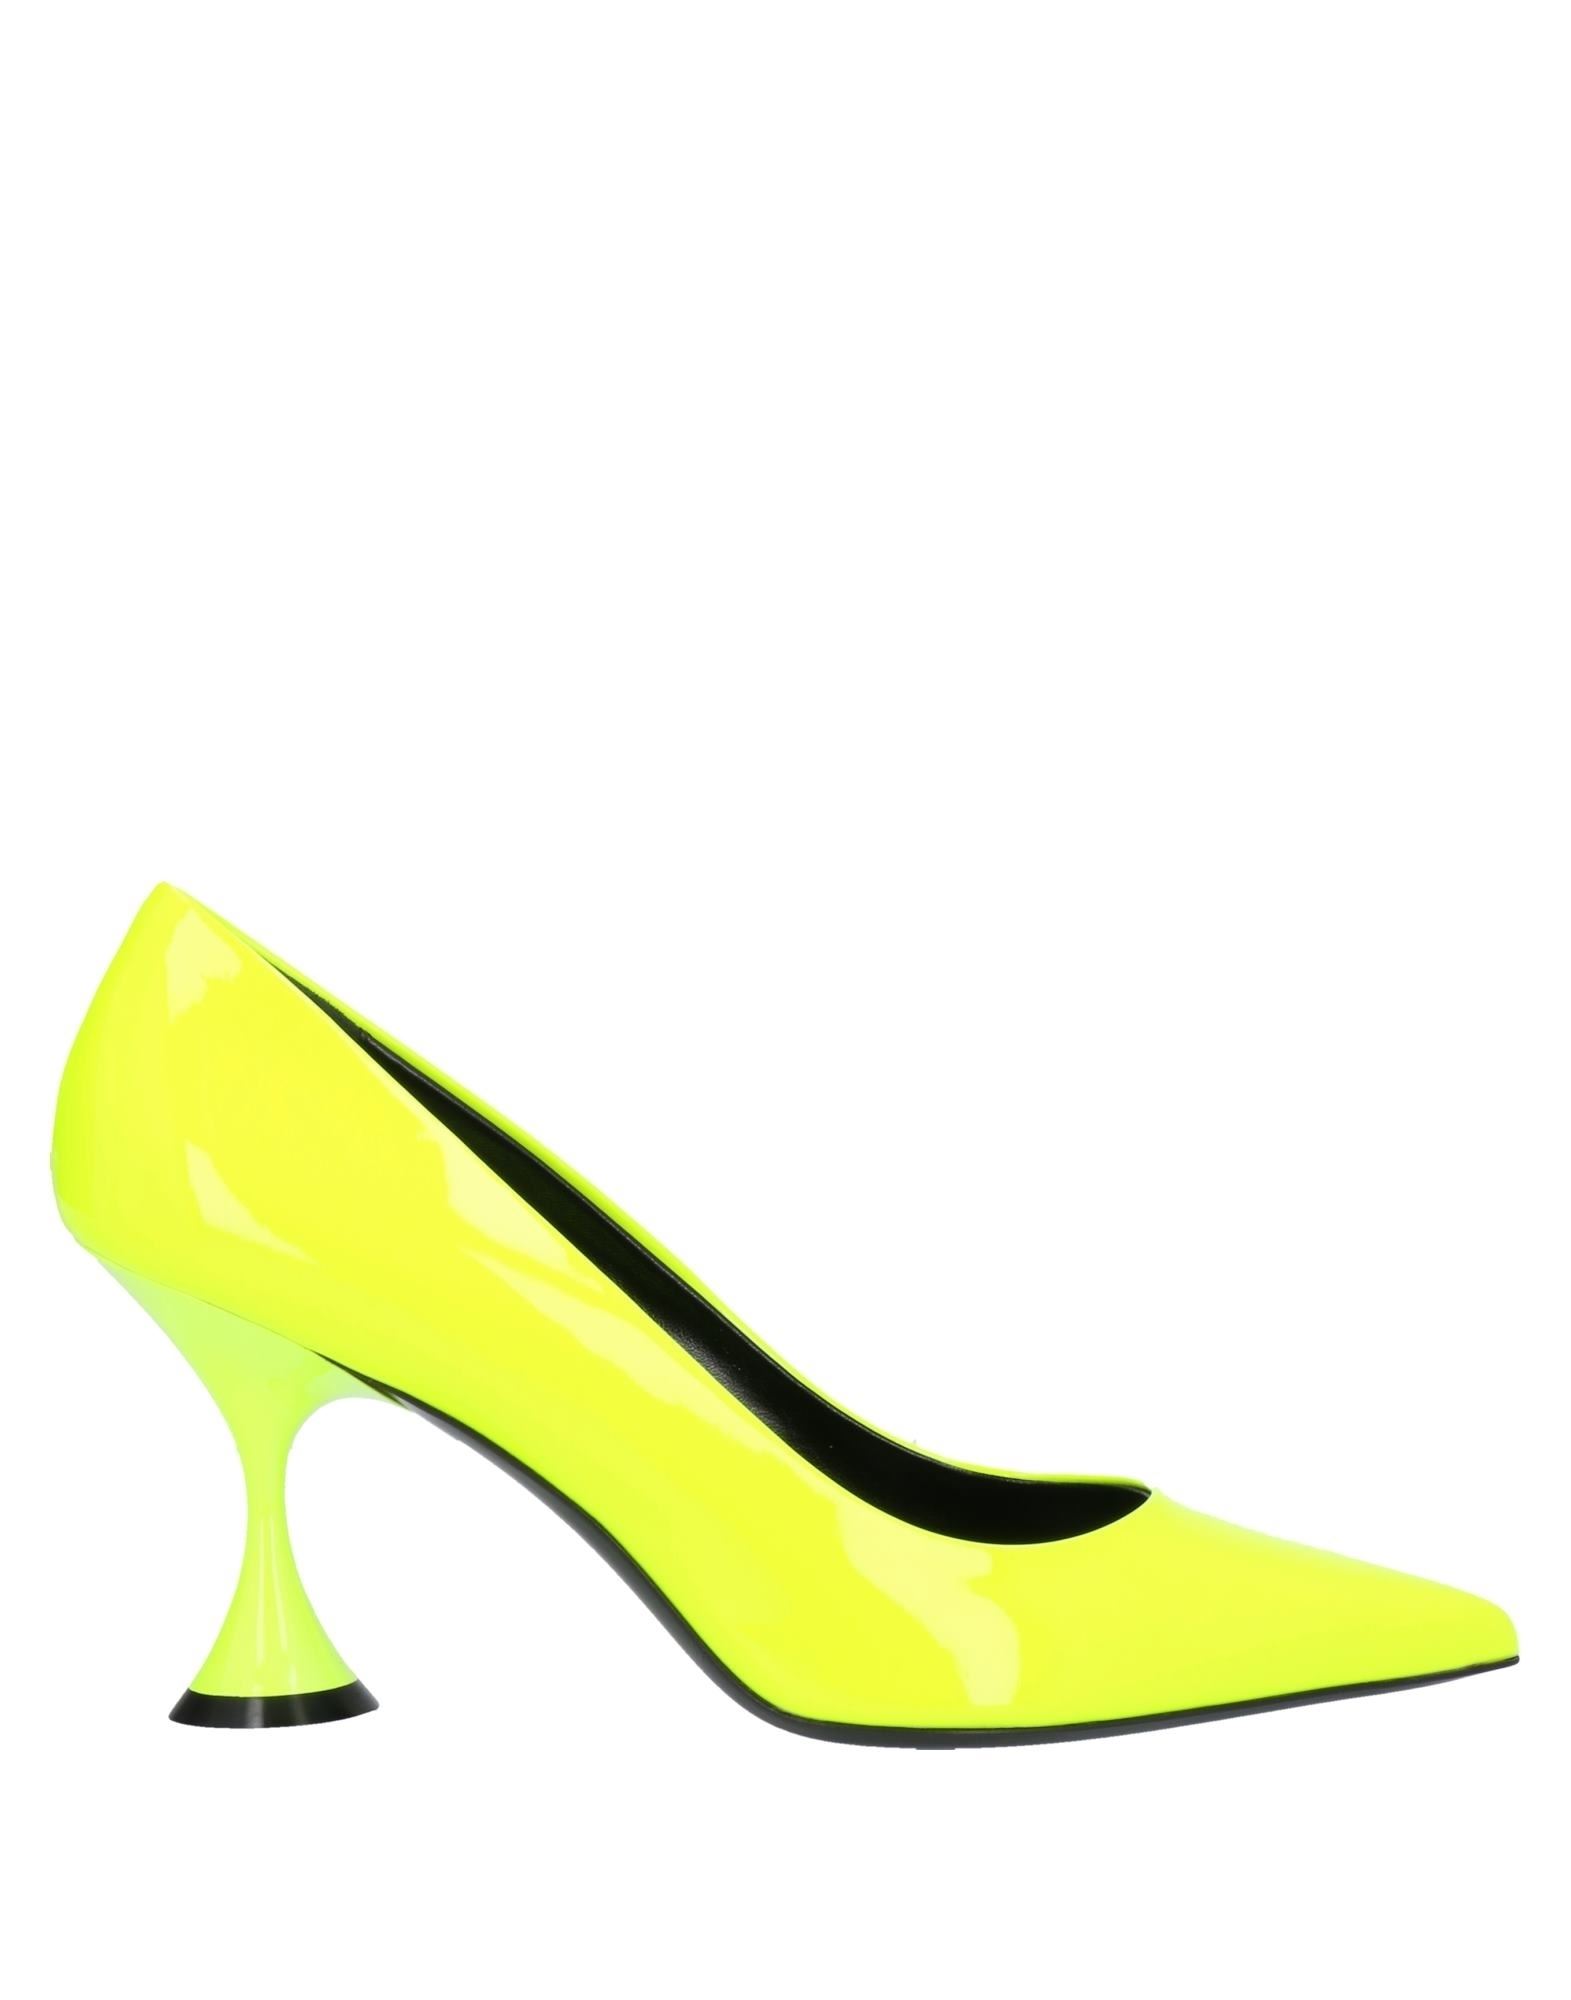 Aldo Castagna For Shabby Chic Pumps In Yellow